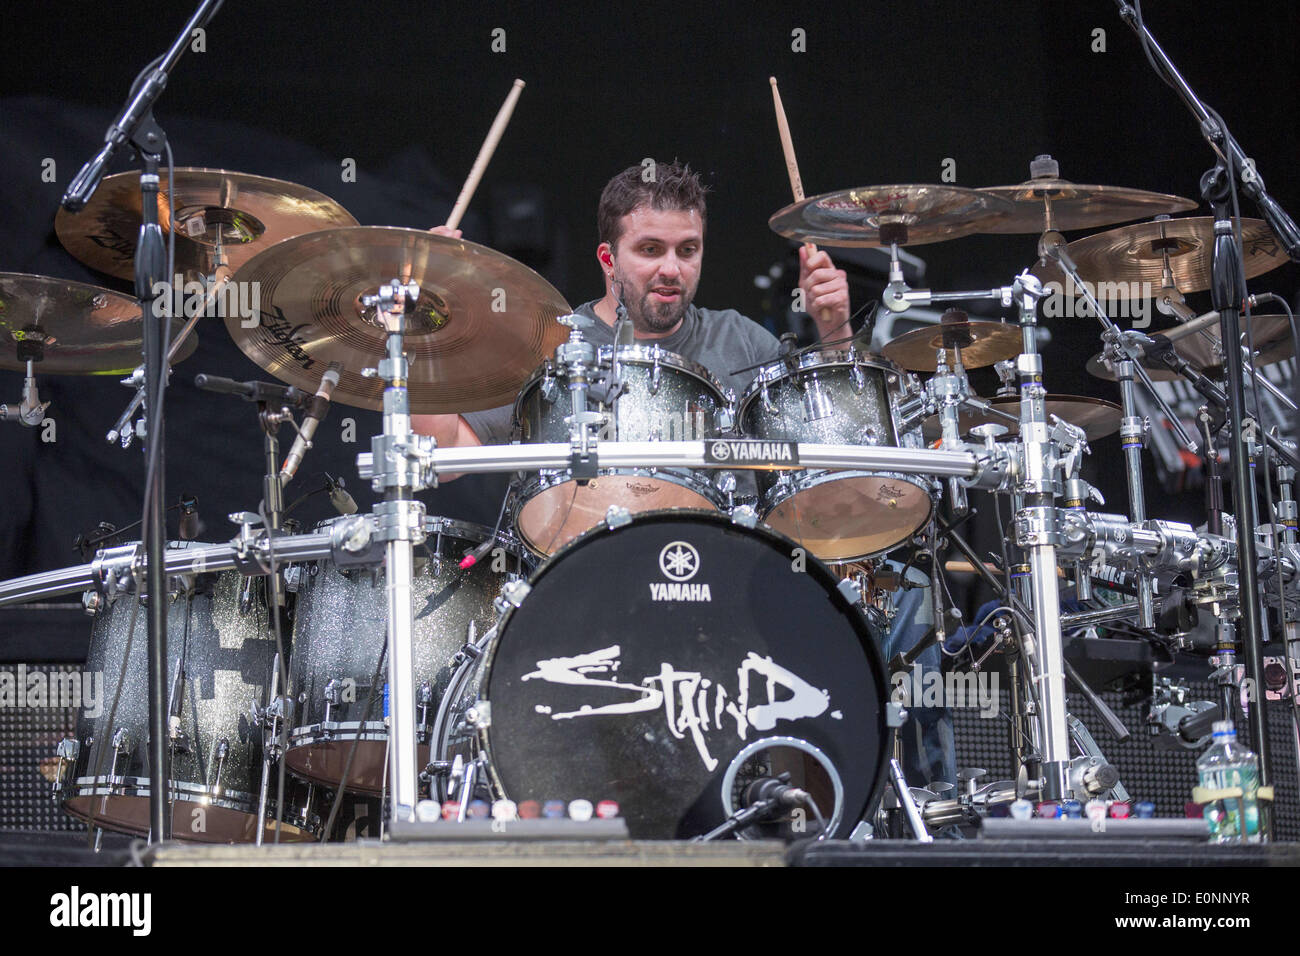 Columbus, Ohio, USA. 16th May, 2014. Drummer SAL GIANCARELLI of Staind ...